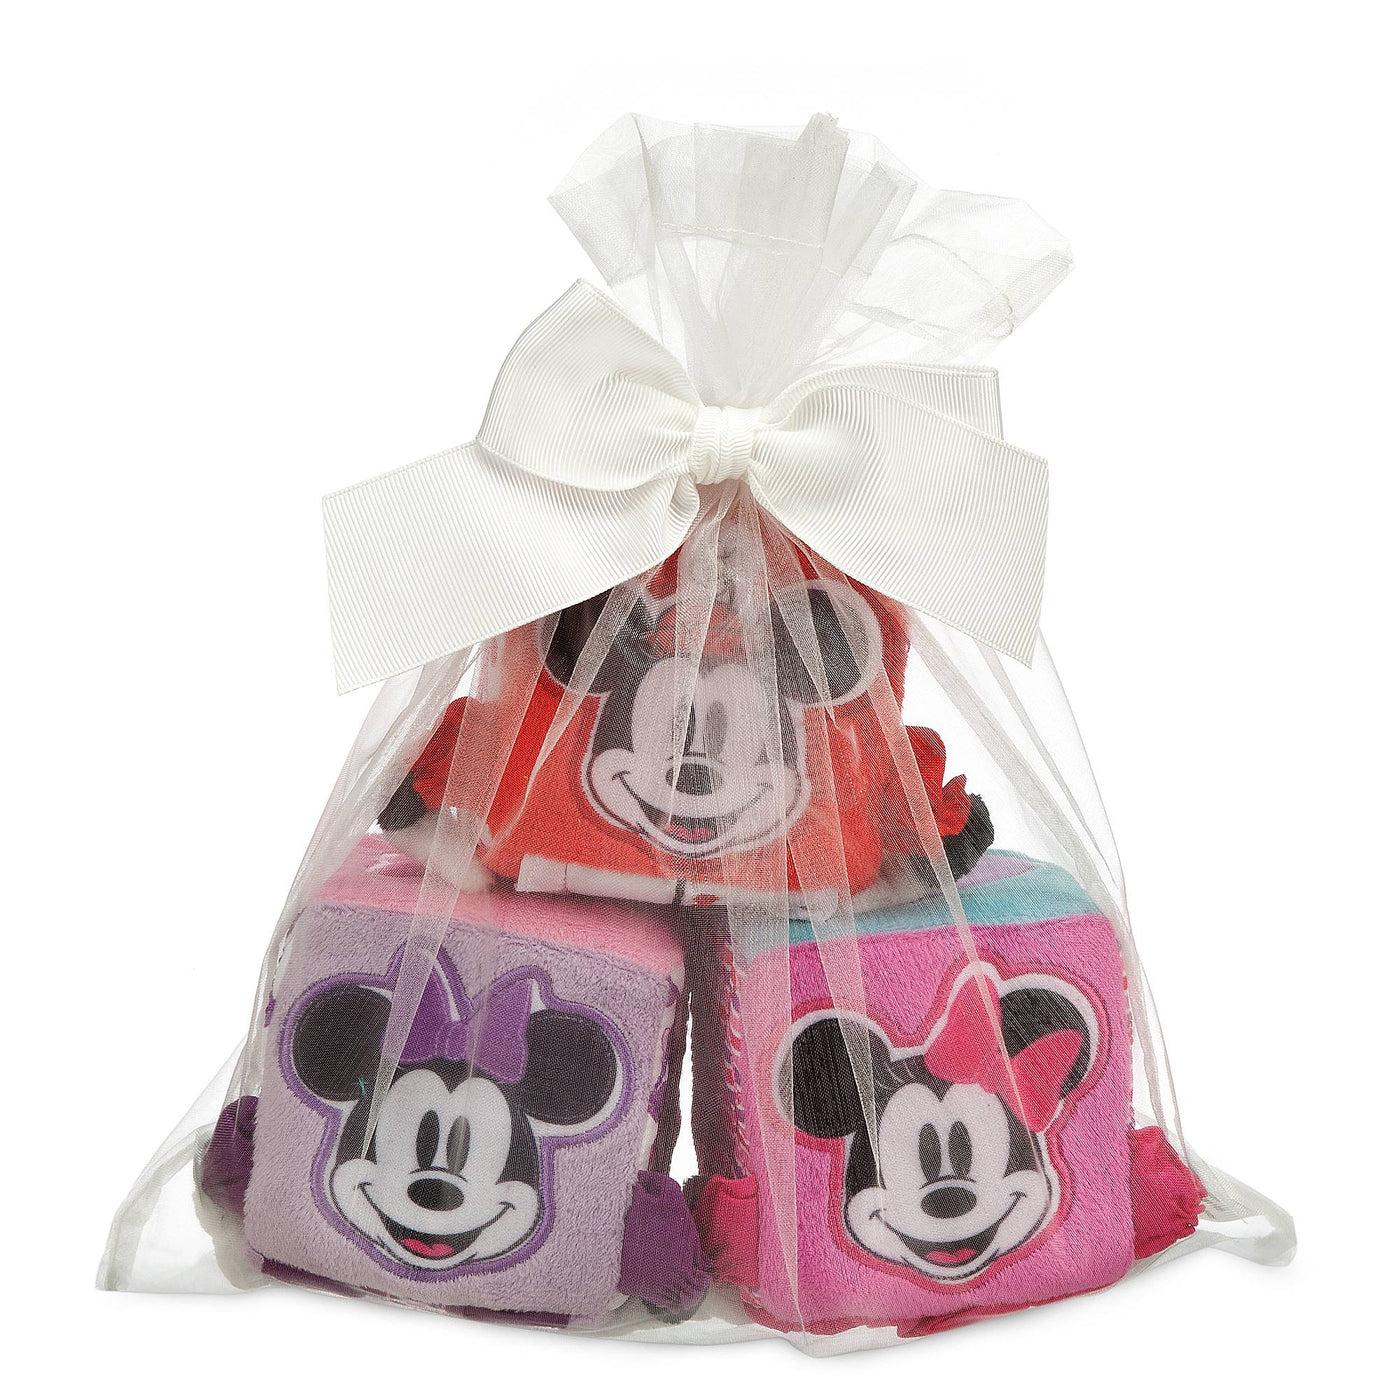 Disney Minnie Mouse Soft Blocks for Baby Toy New with Tag